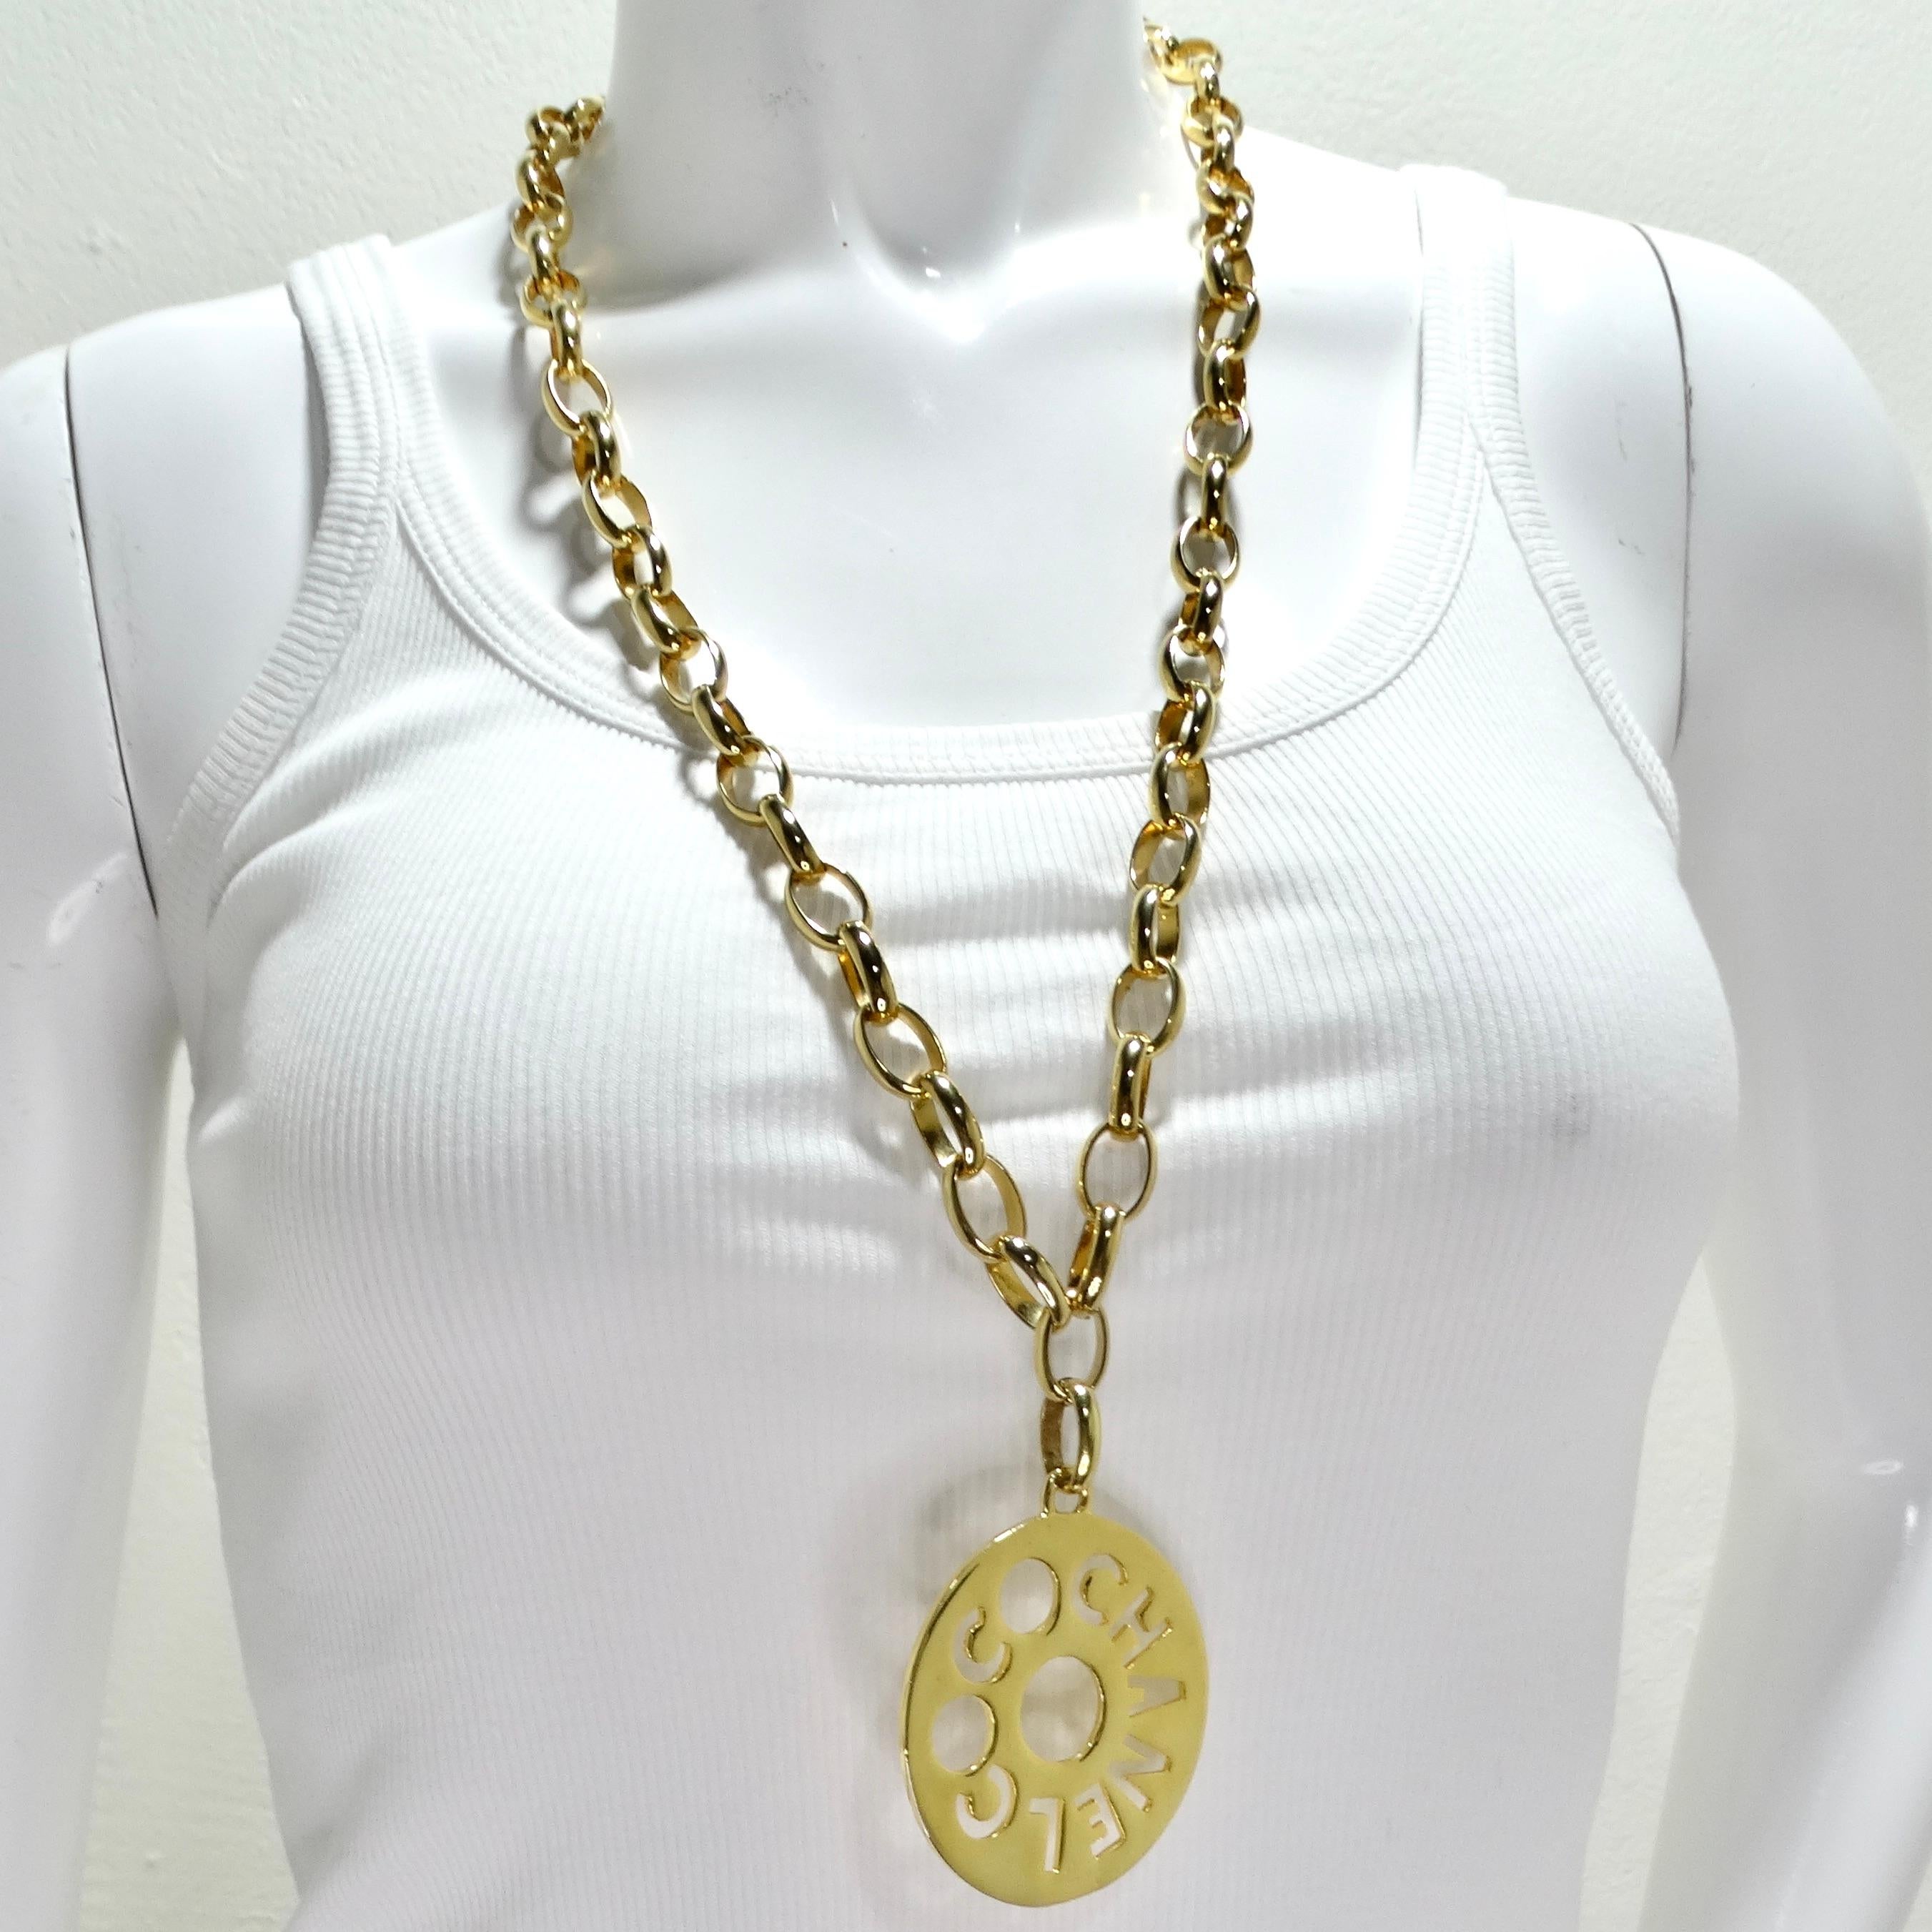 Make a statement with the Chanel 1970s Gold Tone Oversize Pendant Necklace, a true embodiment of luxury and elegance. This stunning piece features a chunky gold-tone chain link necklace adorned with a large round pendant showcasing the iconic Coco